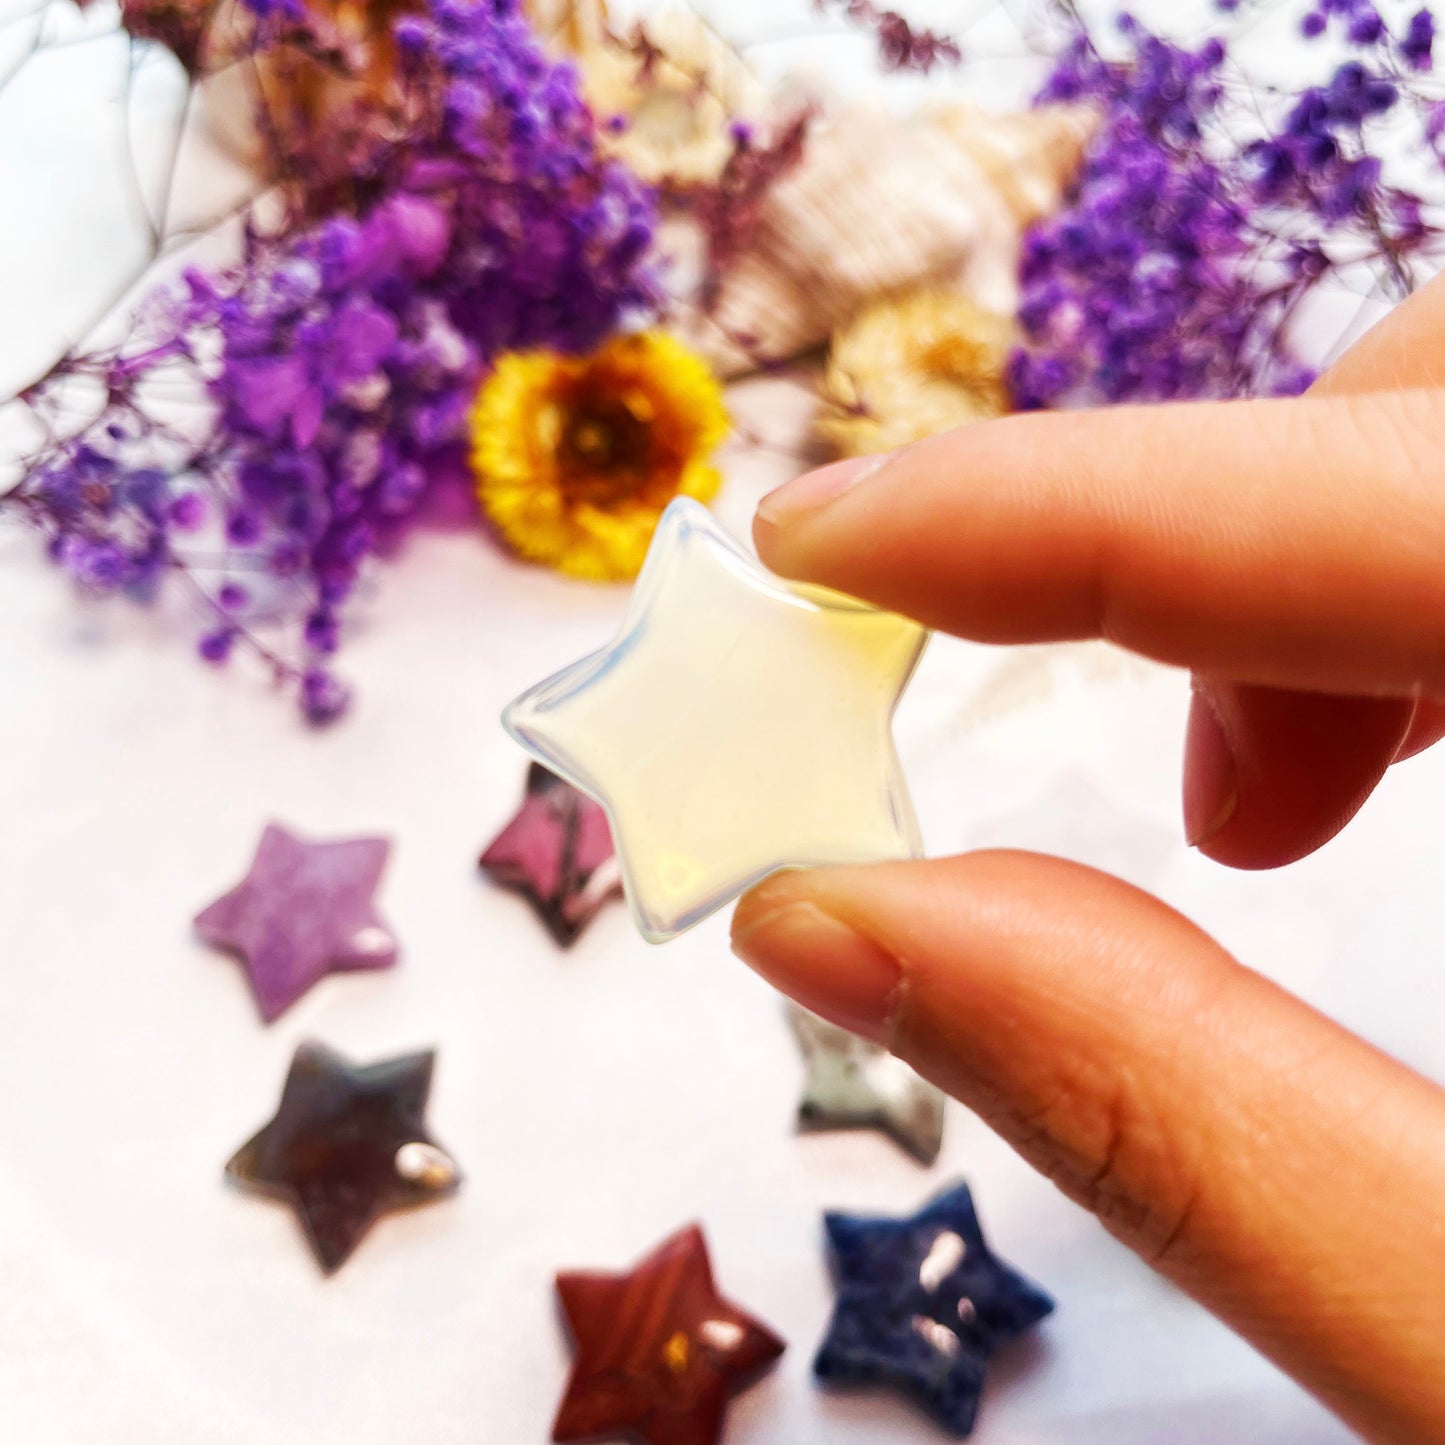 Star crystal carving